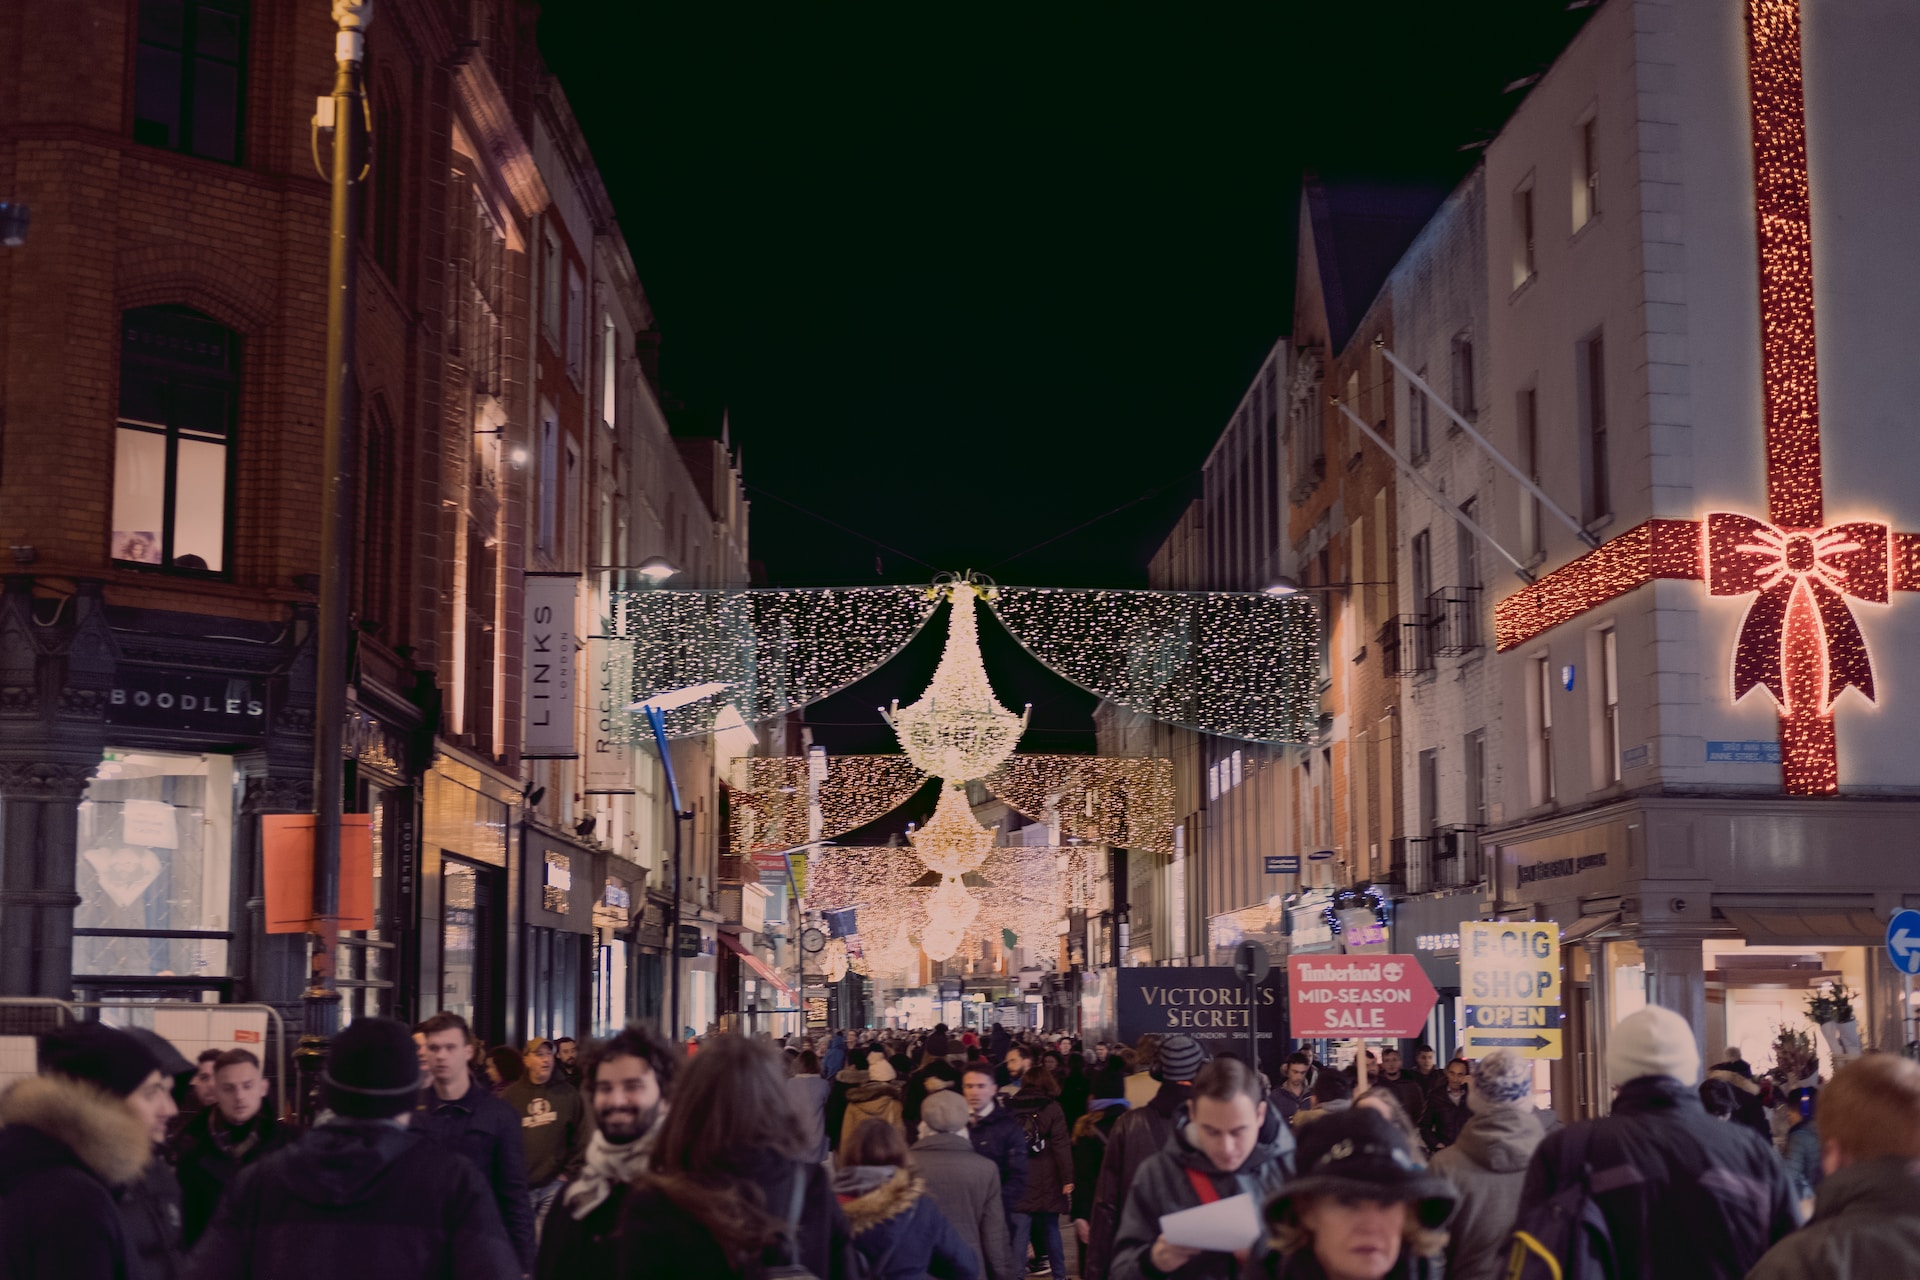 Christmas in Ireland is a great period to visit the country and enjoy its festivities.